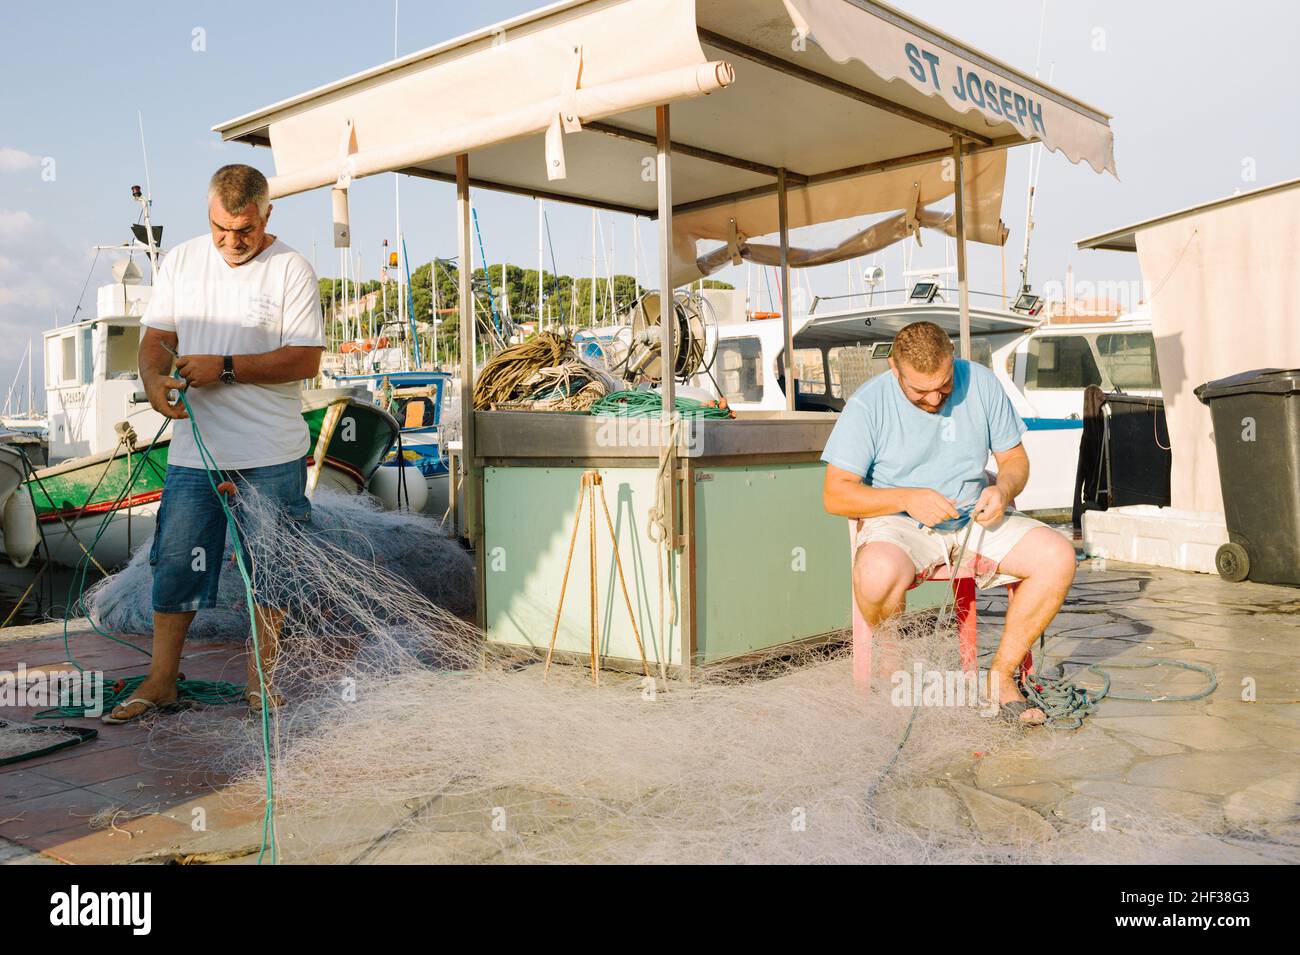 Two fisherman who are twin brothers mending their nets after a fishing trip at first light in the small French fishing port of Sanary sur Mer, Cote d' Azur in the south of France. 2014. Stock Photo